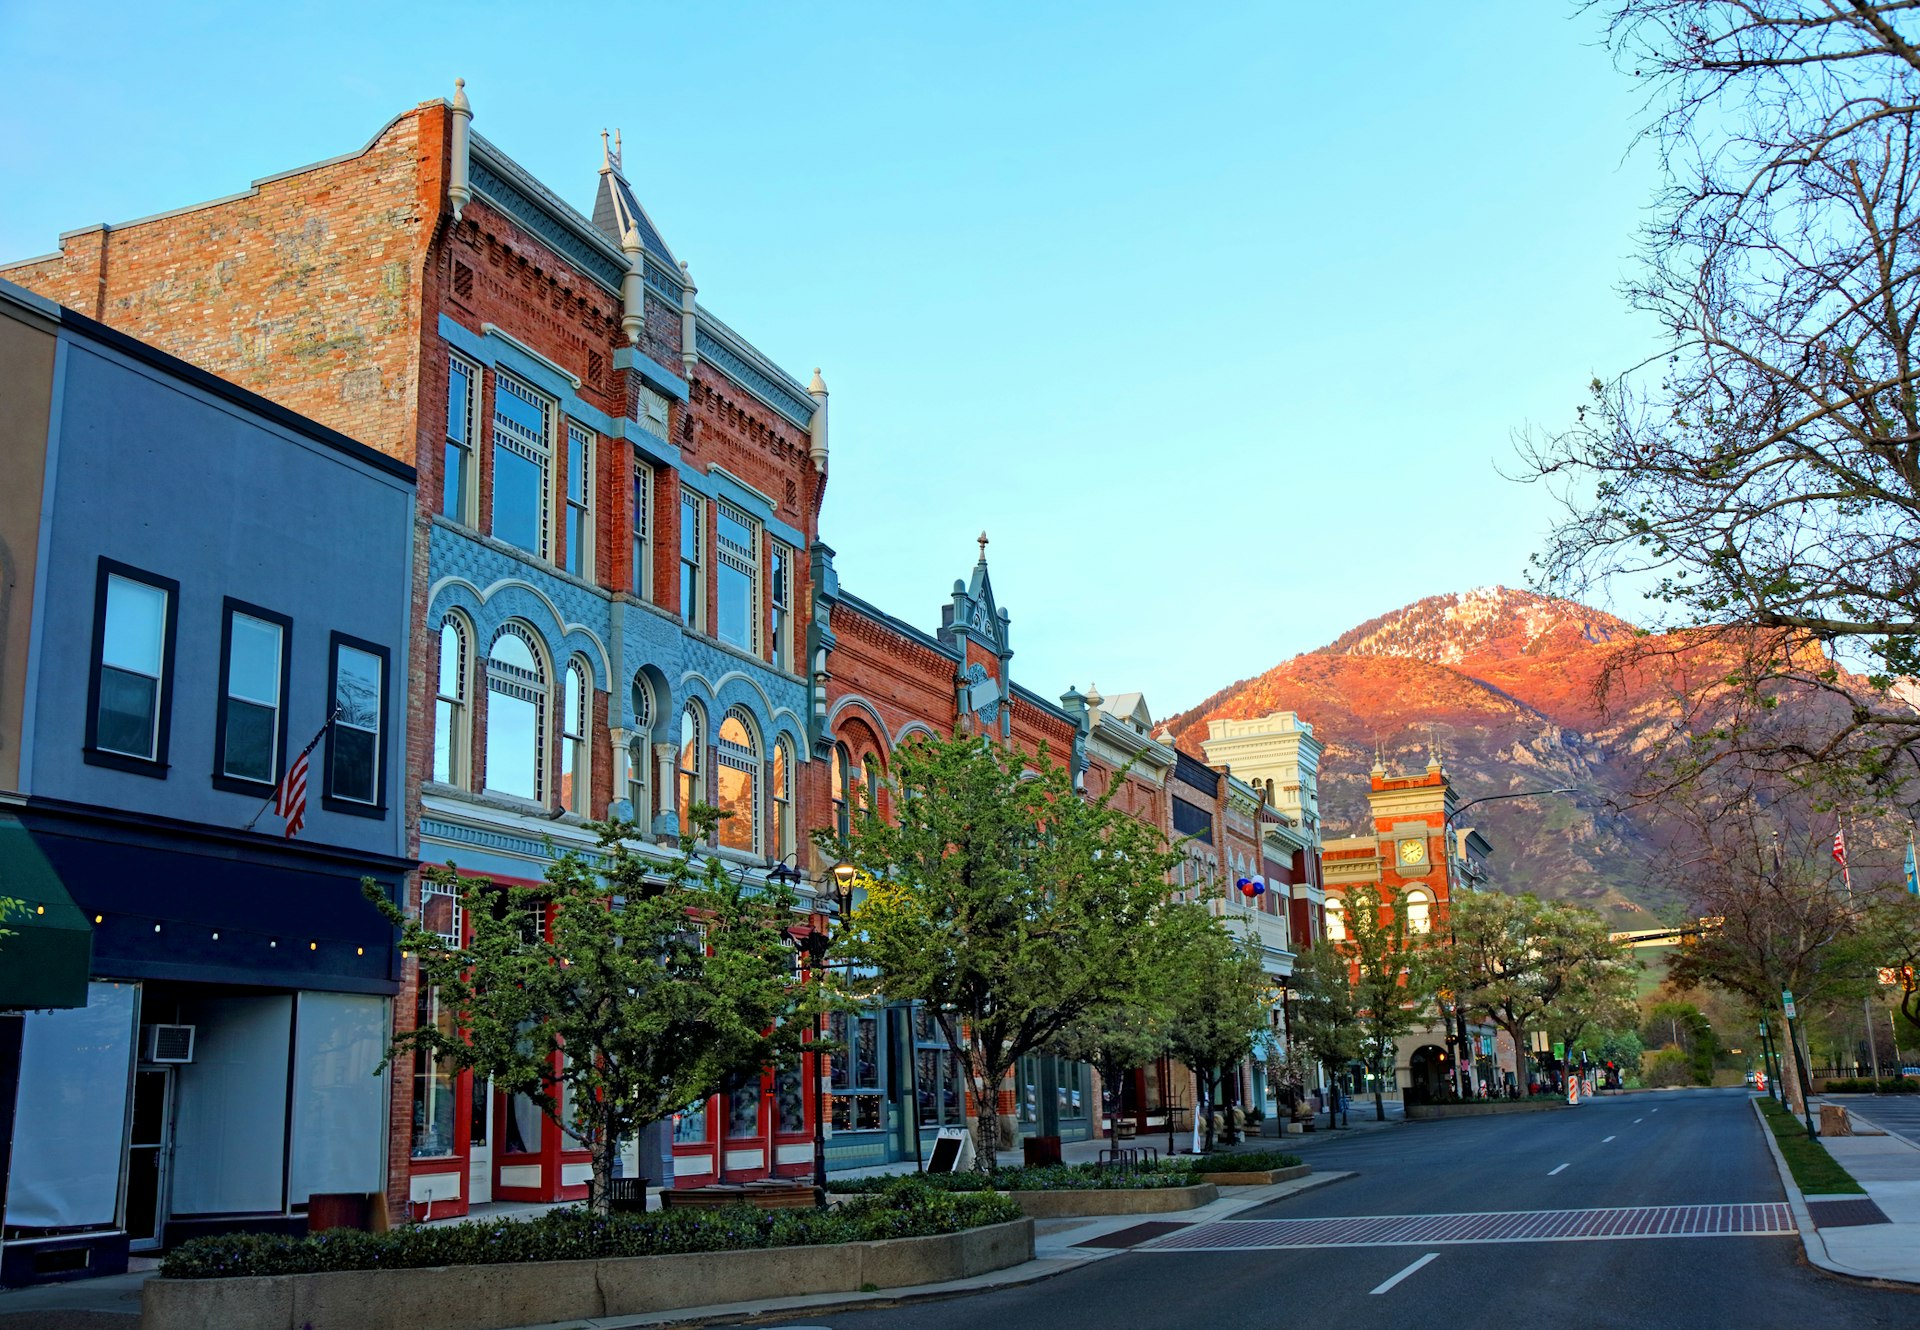 A strip of historic brick buildings lines a street in Provo, Utah in front of dramatic mountains